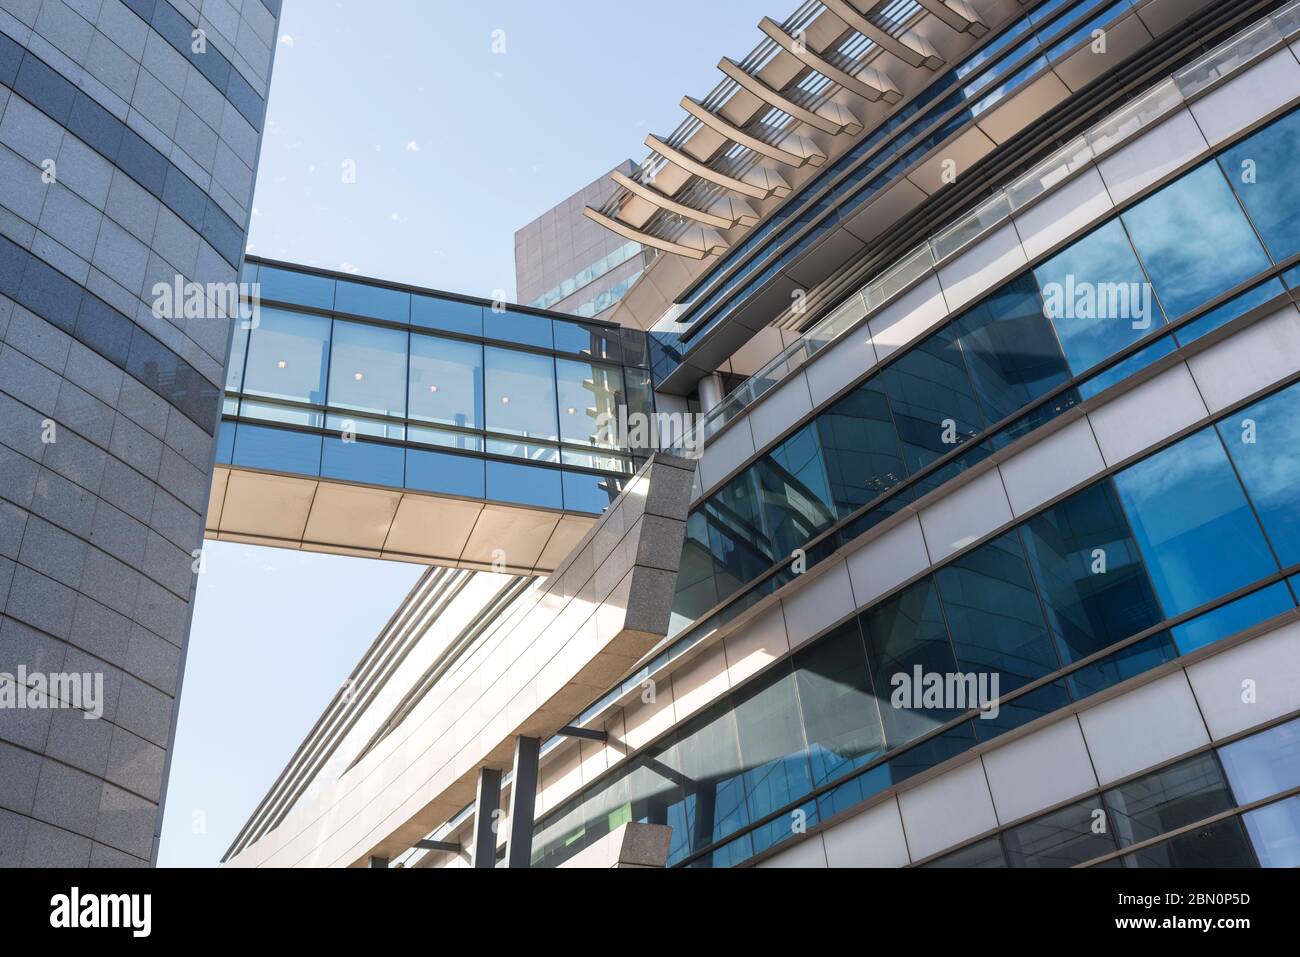 Montevideo / Uruguay, Dec 28, 2018: Detail of the Cultural Complex of the Telecommunications Tower or Antel tower, modern architecture Stock Photo